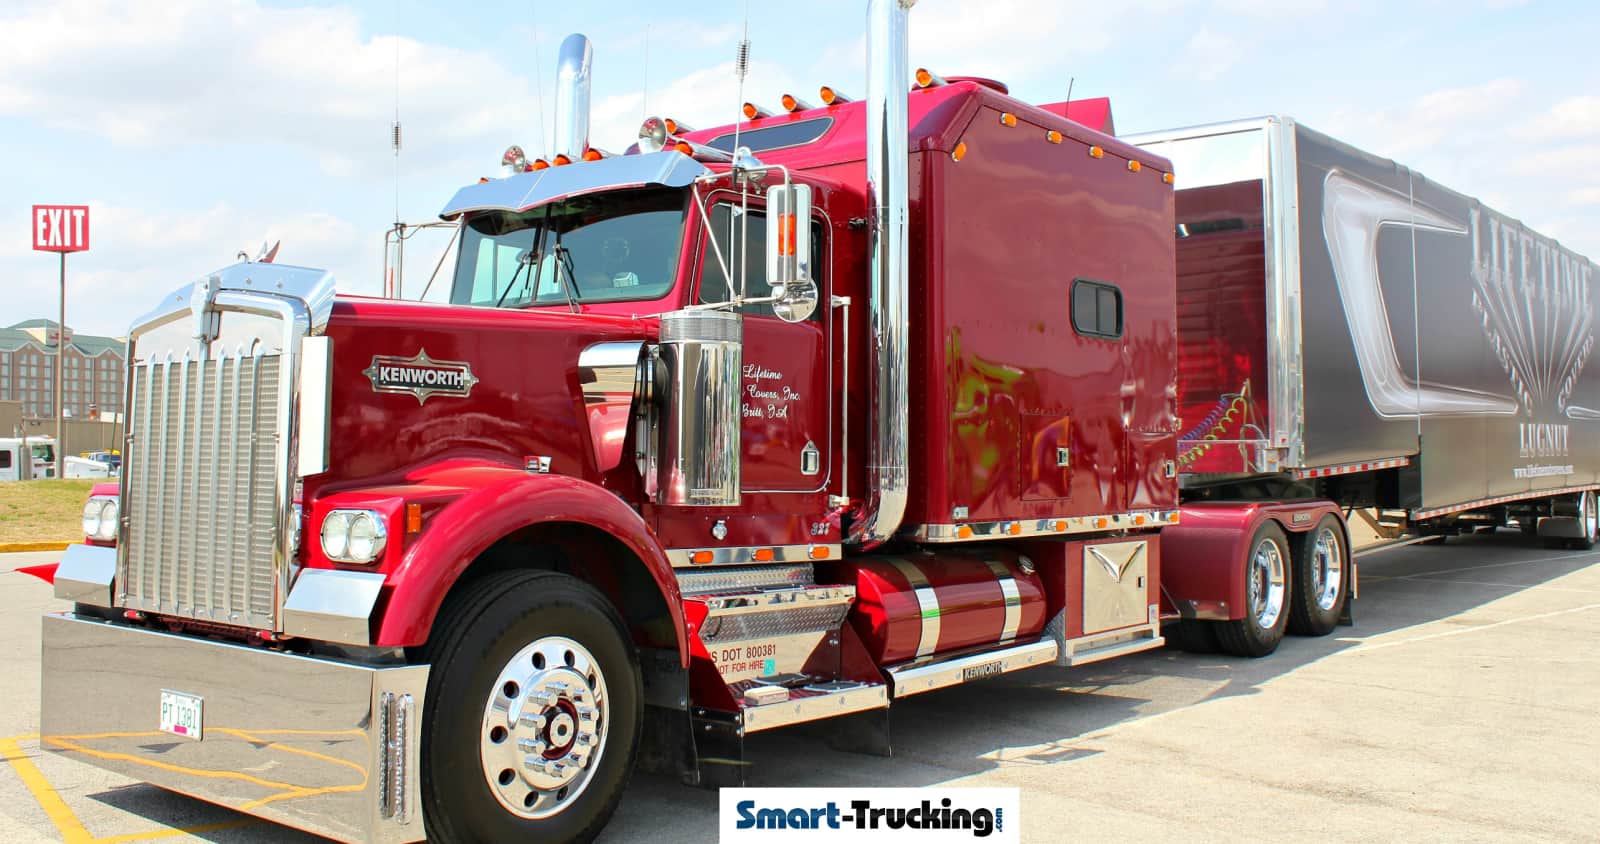 7 Largest Semi Truck Manufacturers In The US